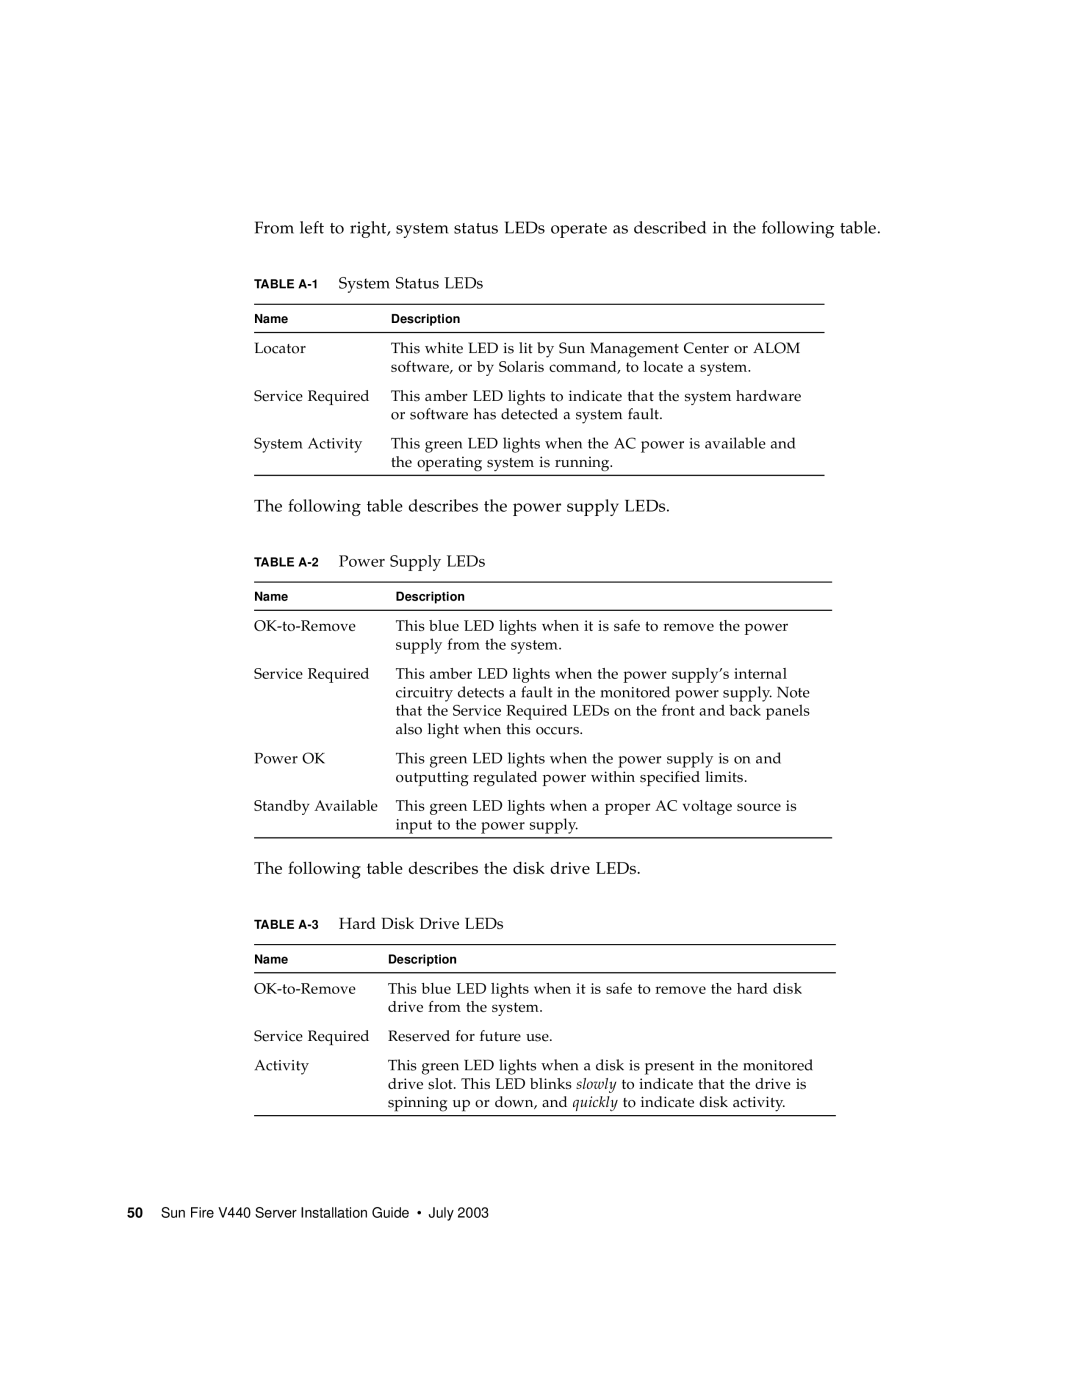 Sun Microsystems 816-7727-10 manual The following table describes the power supply LEDs, TABLE A-1 System Status LEDs 